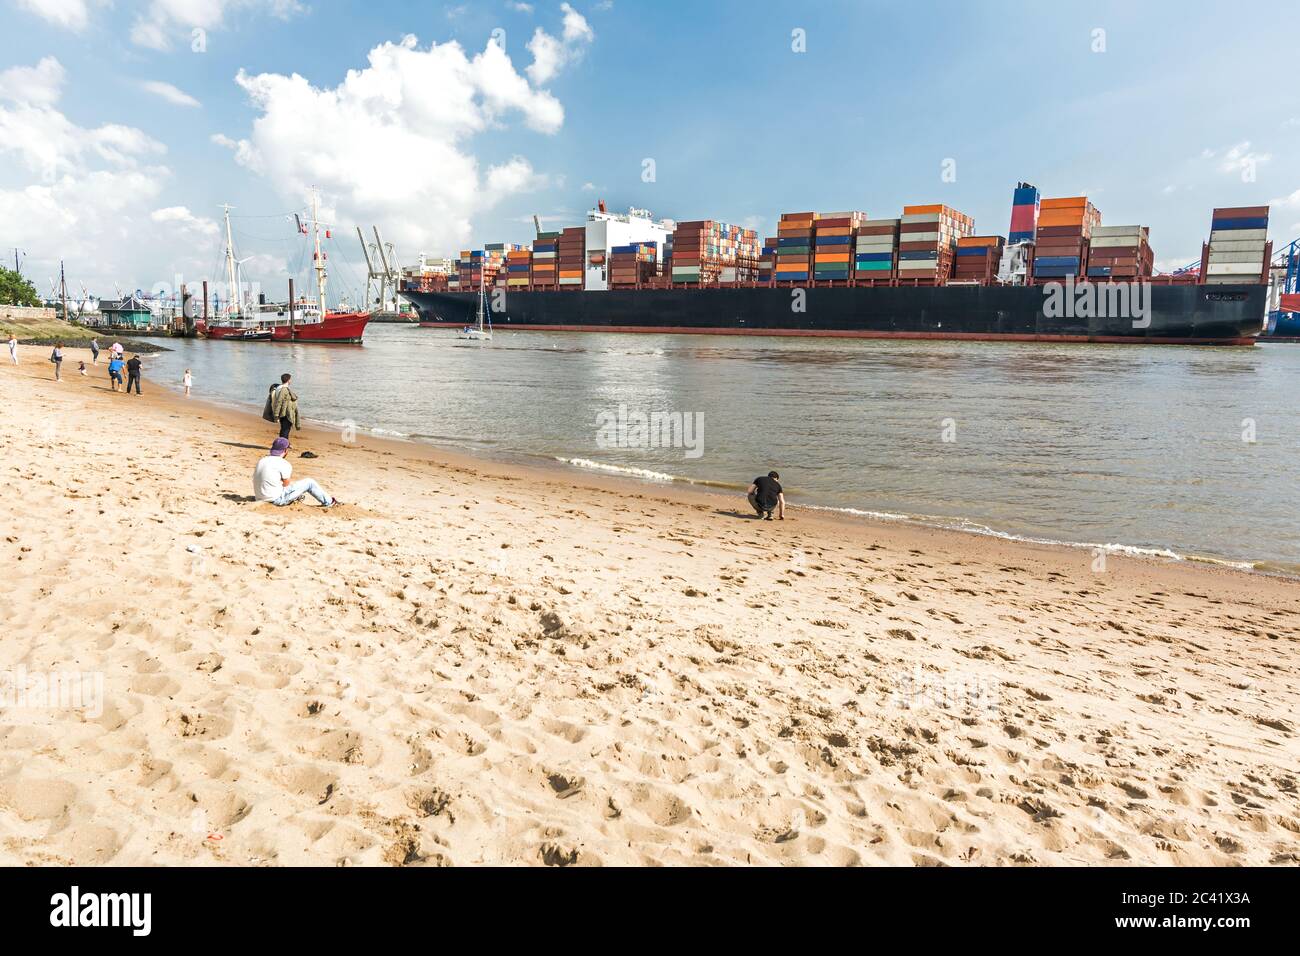 City beach in Hamburg, Germany with large container vessel in the background Stock Photo